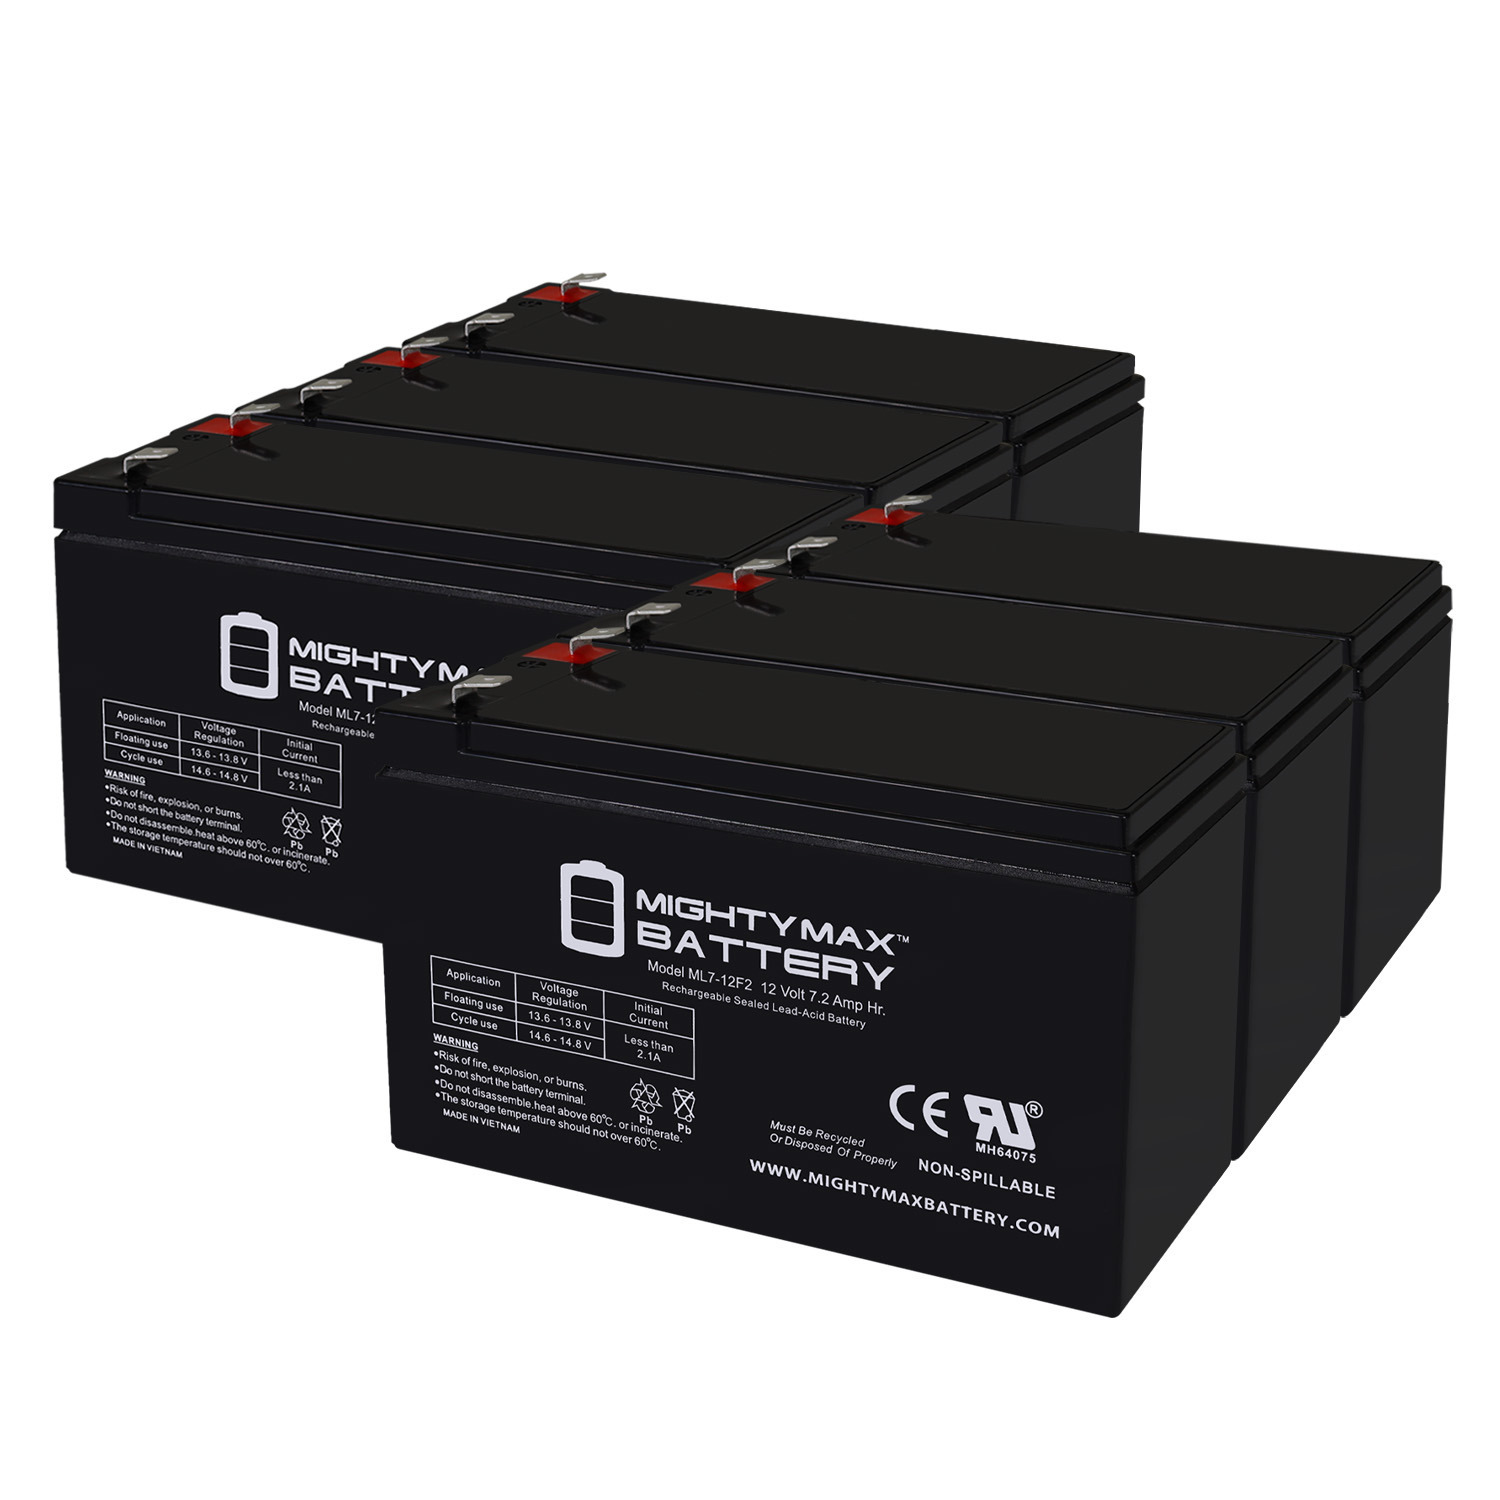 12V 7Ah F2 Replacement Battery for Razor 13112730 Model - 6 Pack